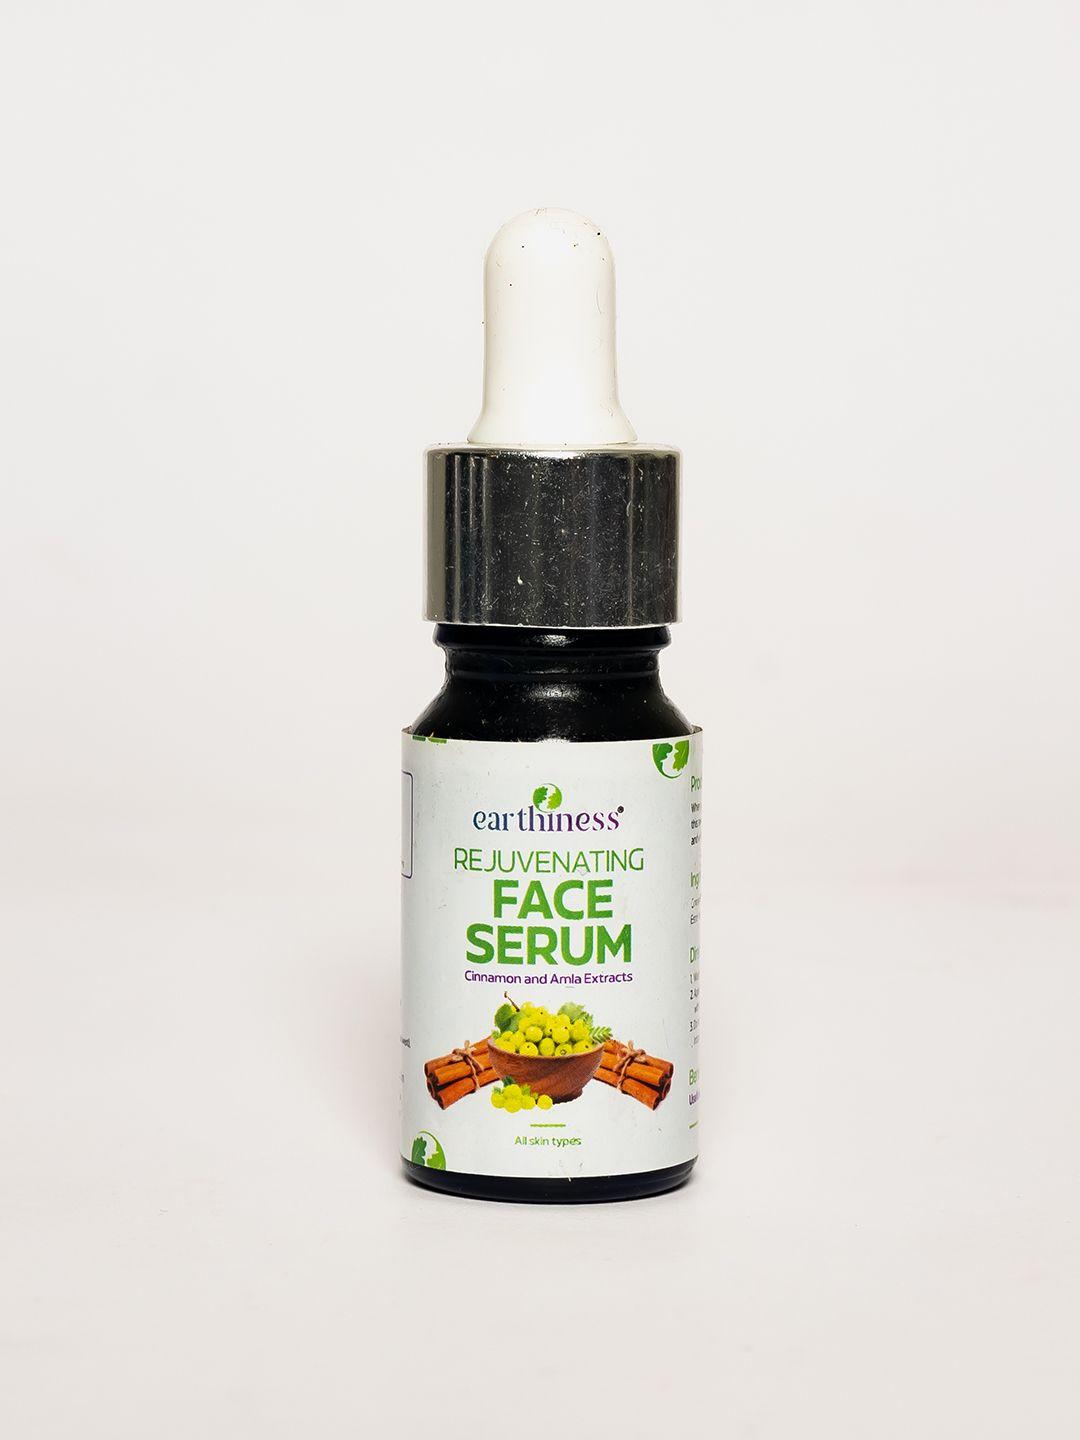 earthiness 100% pure & natural rejuvenating face serum - 10 ml